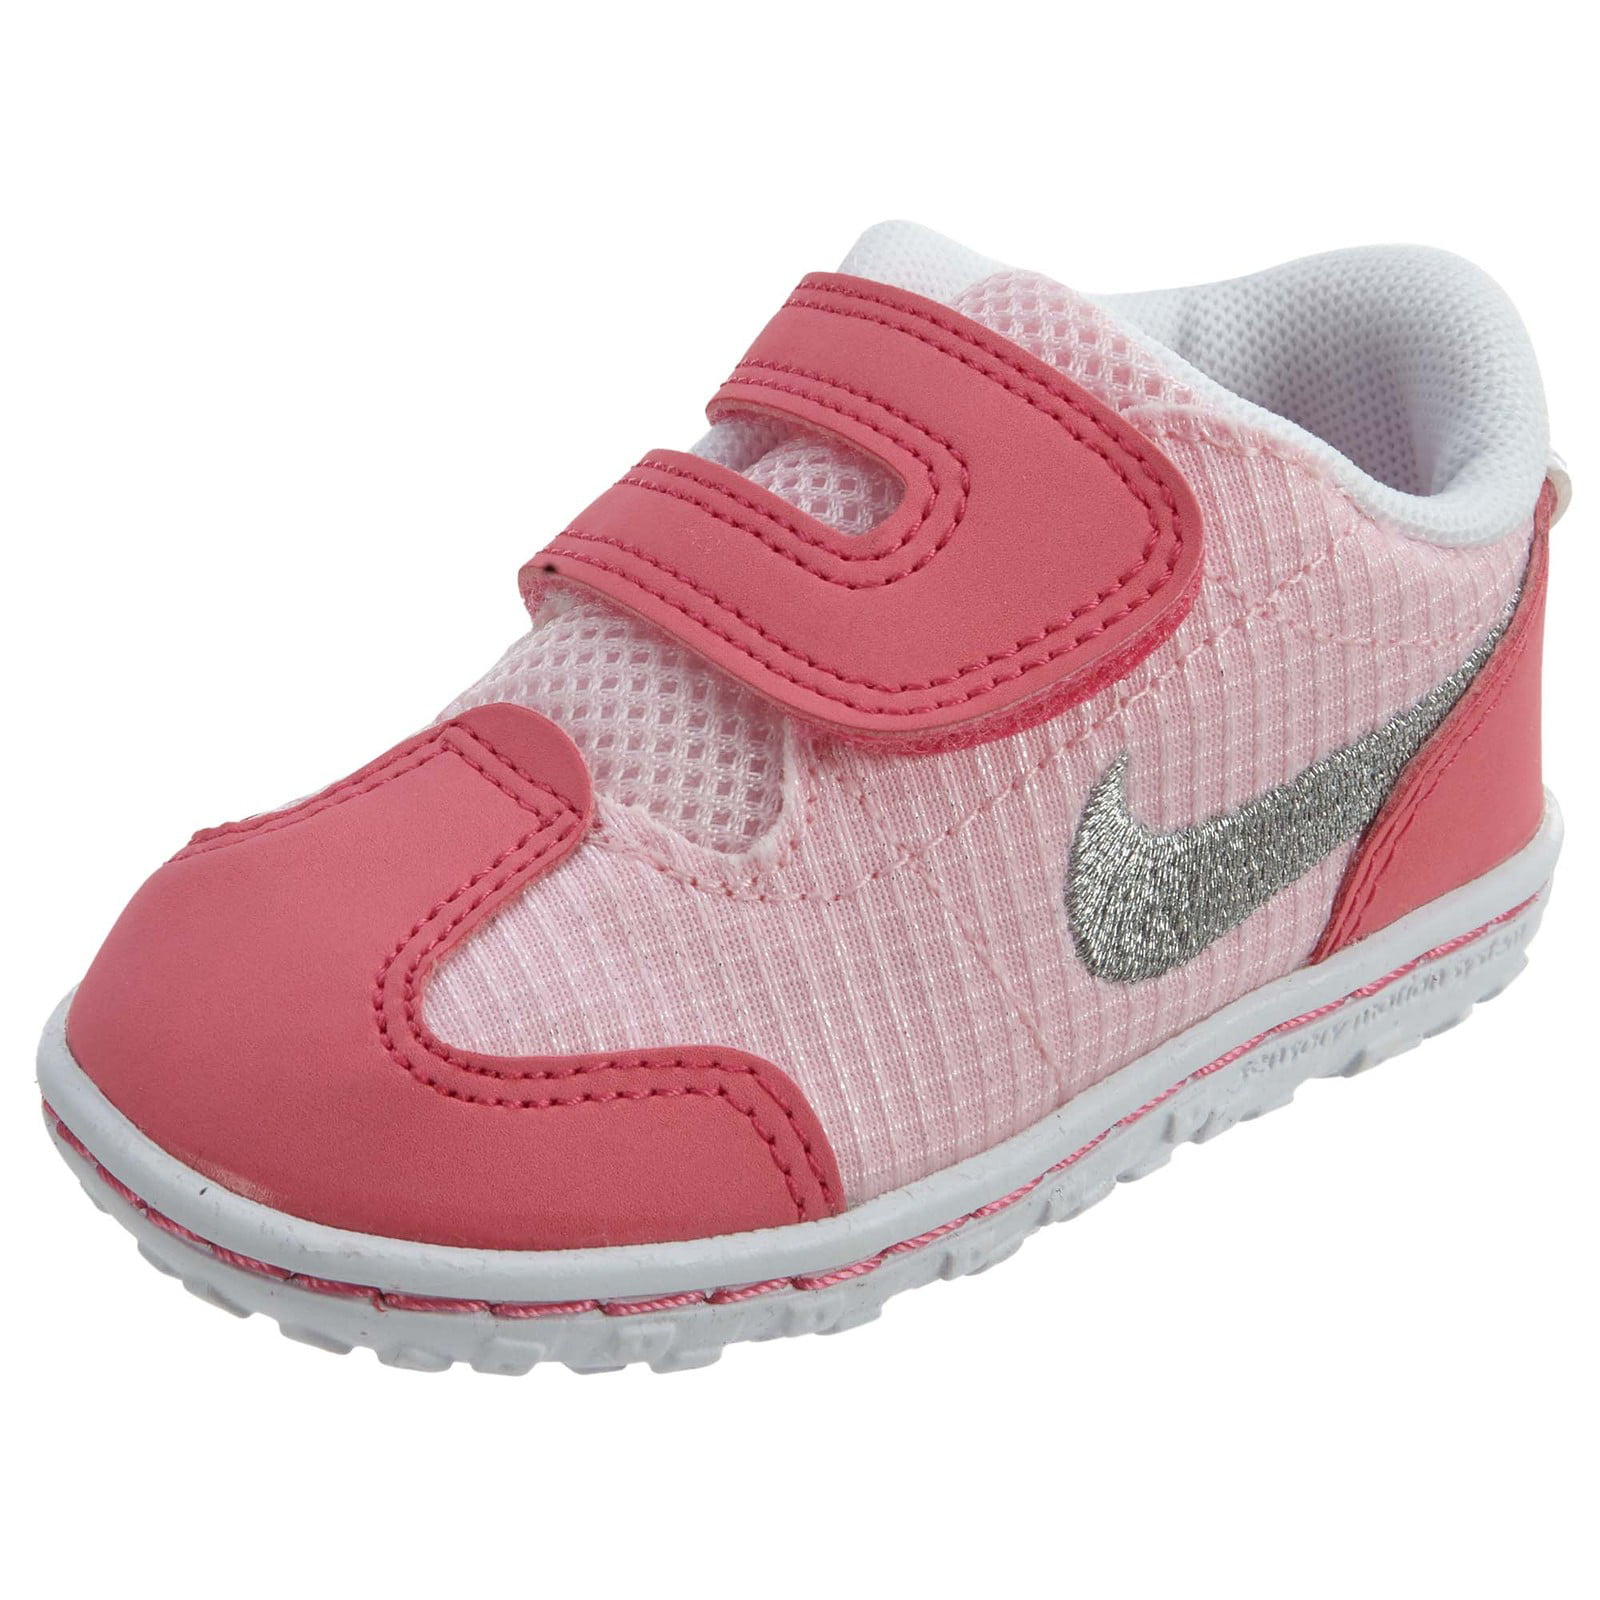 nike first walker shoes